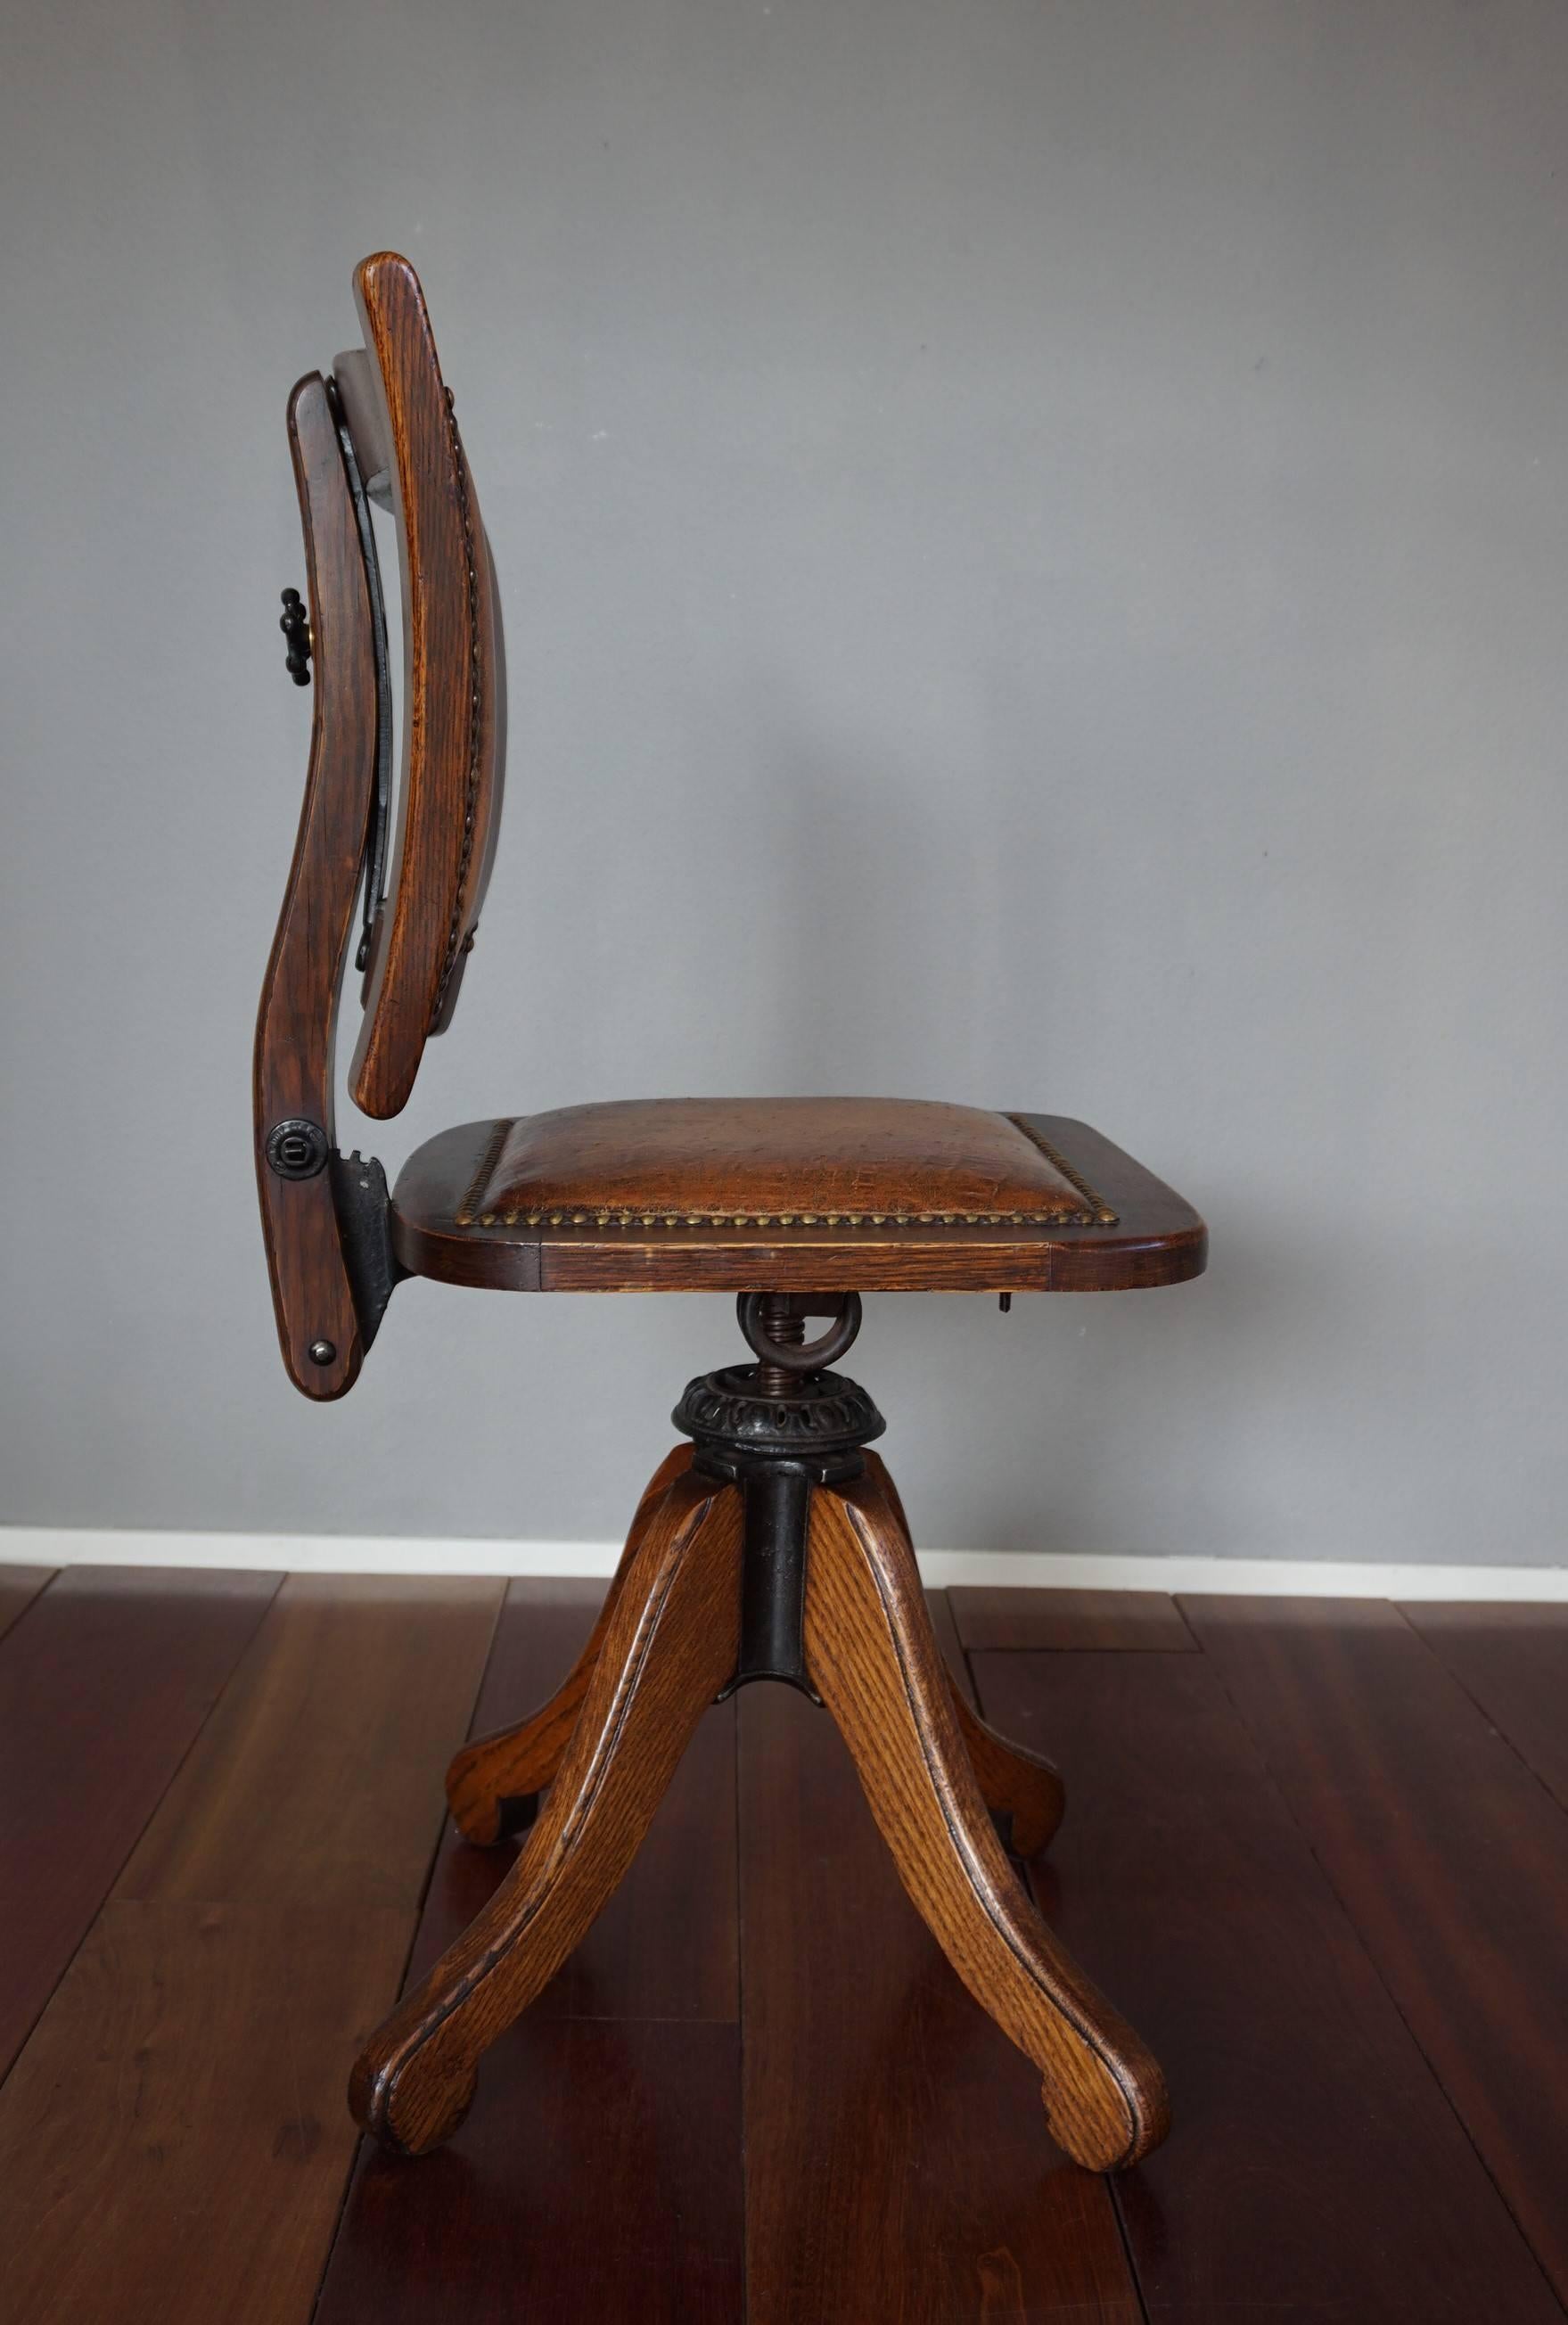 American made, oak and cast iron Arts & Crafts chair with leather upholstery.

The maker of this chair, the Davis Chair Company was founded in 1892 in Marysville, Ohio. We have no idea how this extremely rare and all-American antique chair ended up